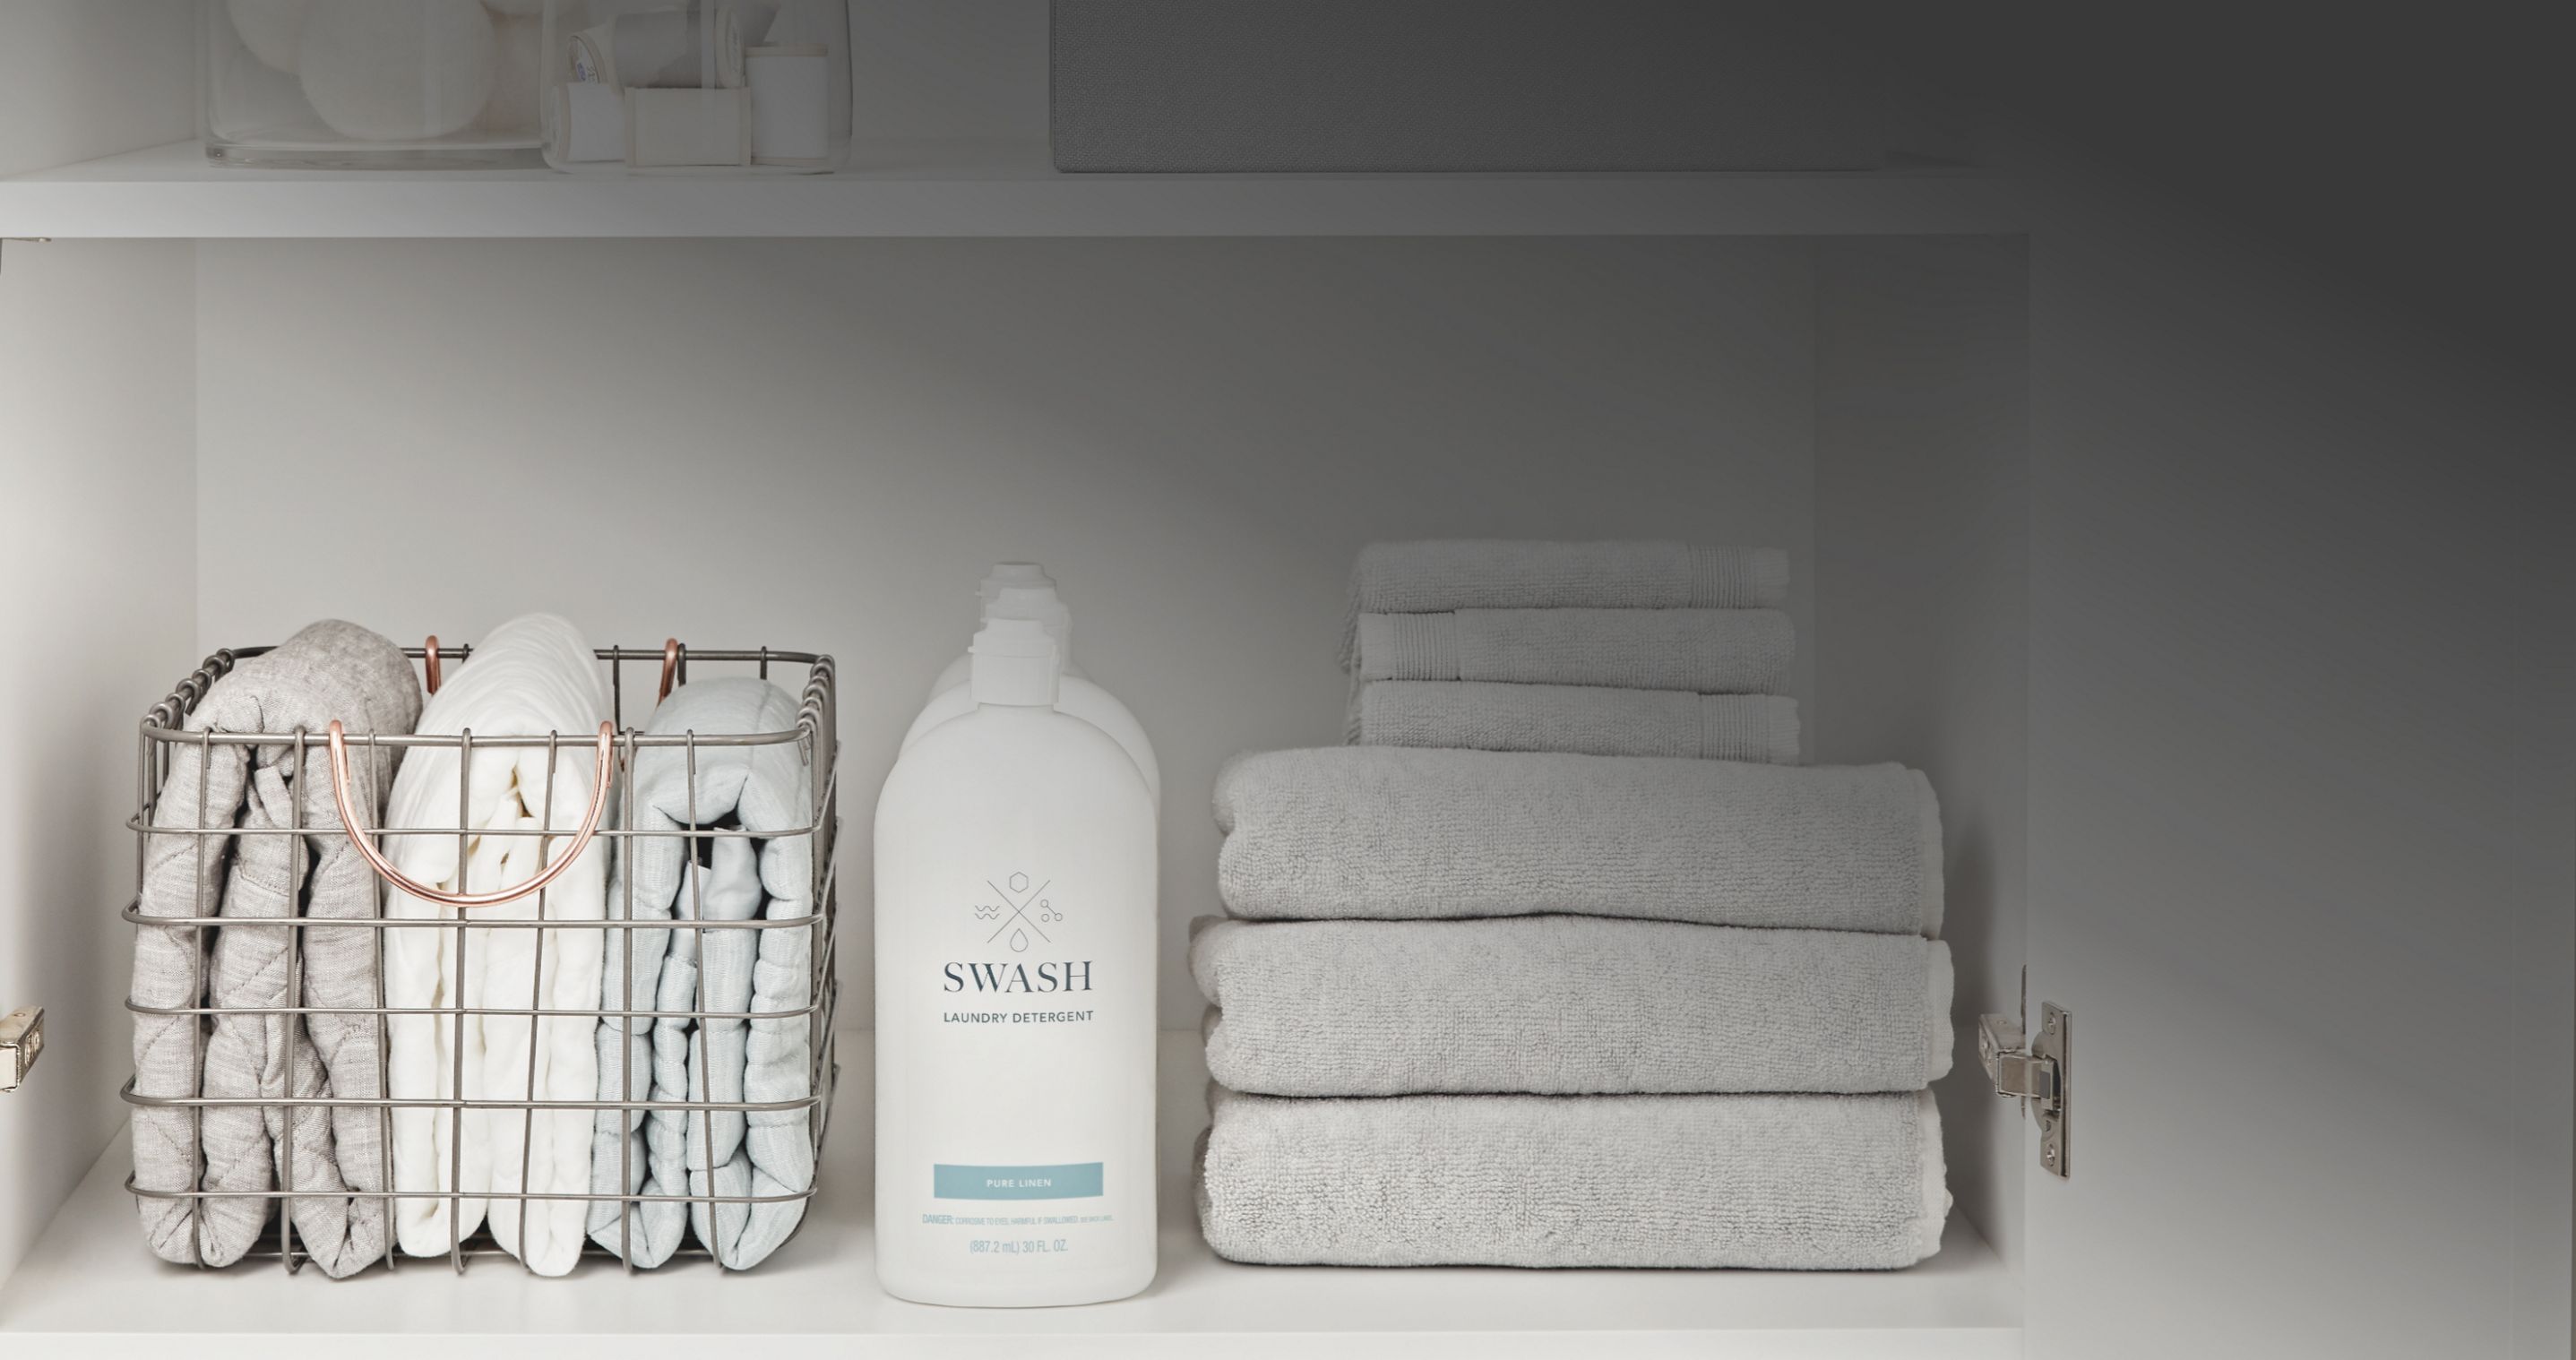 Towels and Swash® Laundry Detergent.